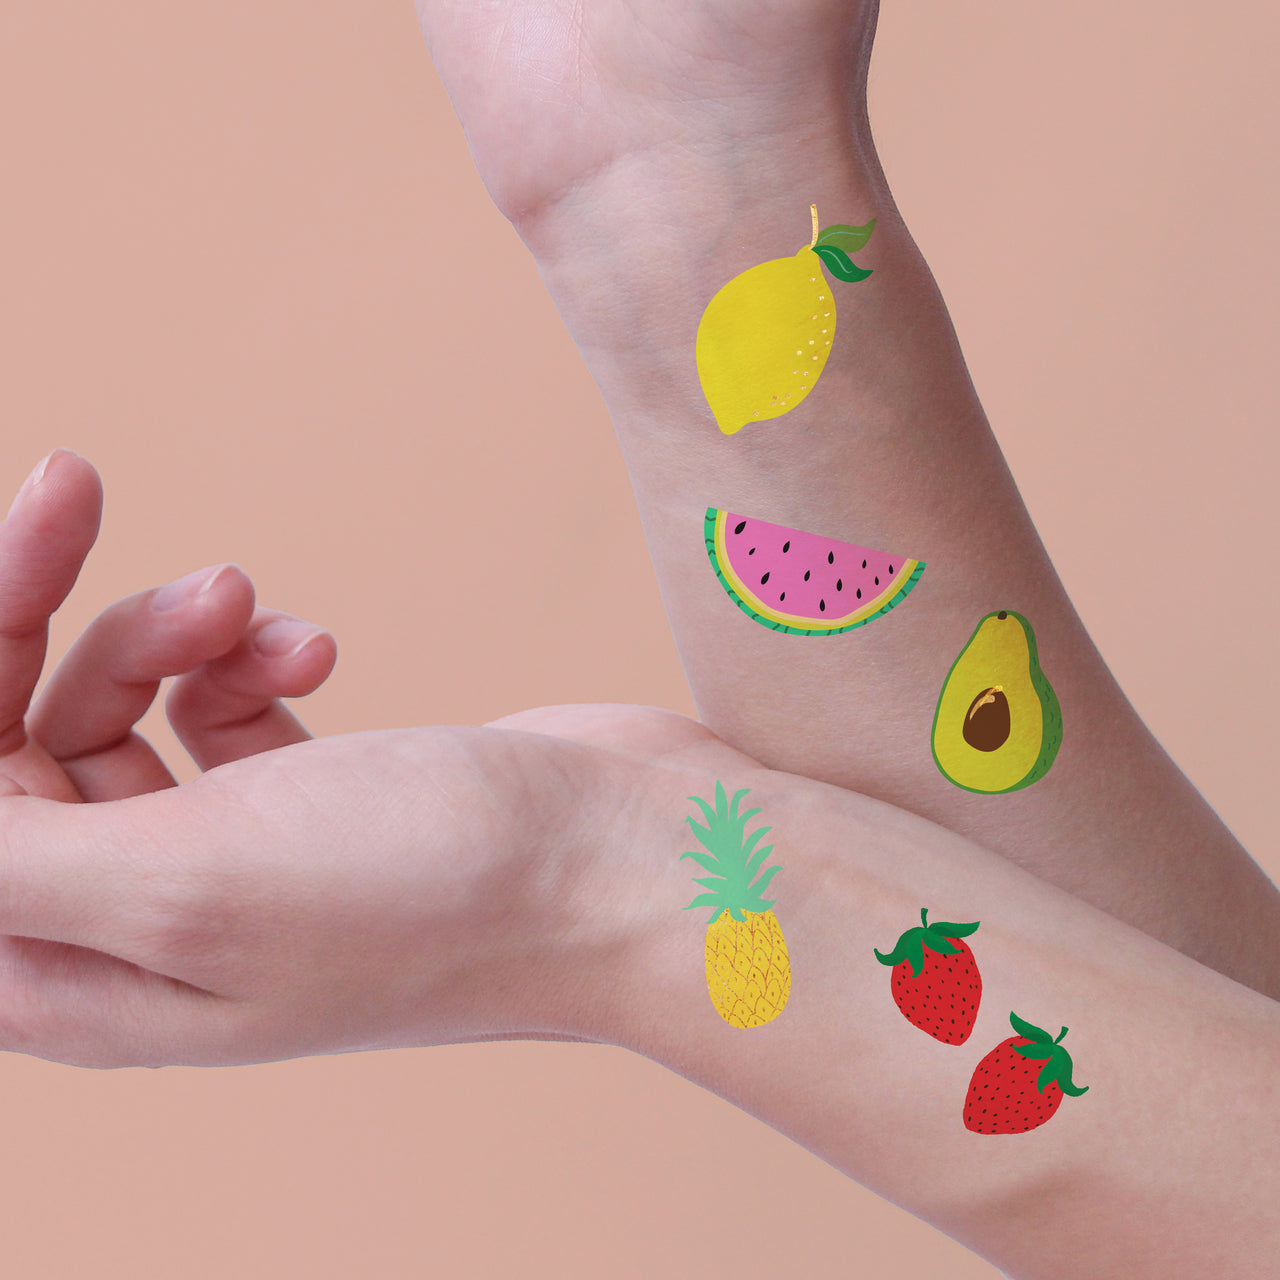 Shine bright in colorful fruit temporary tattoos from the Yummy Tummy Bundle featuring 25 assorted fruit tattoos: lemon, watermelon, avocado, pineapple and strawberries